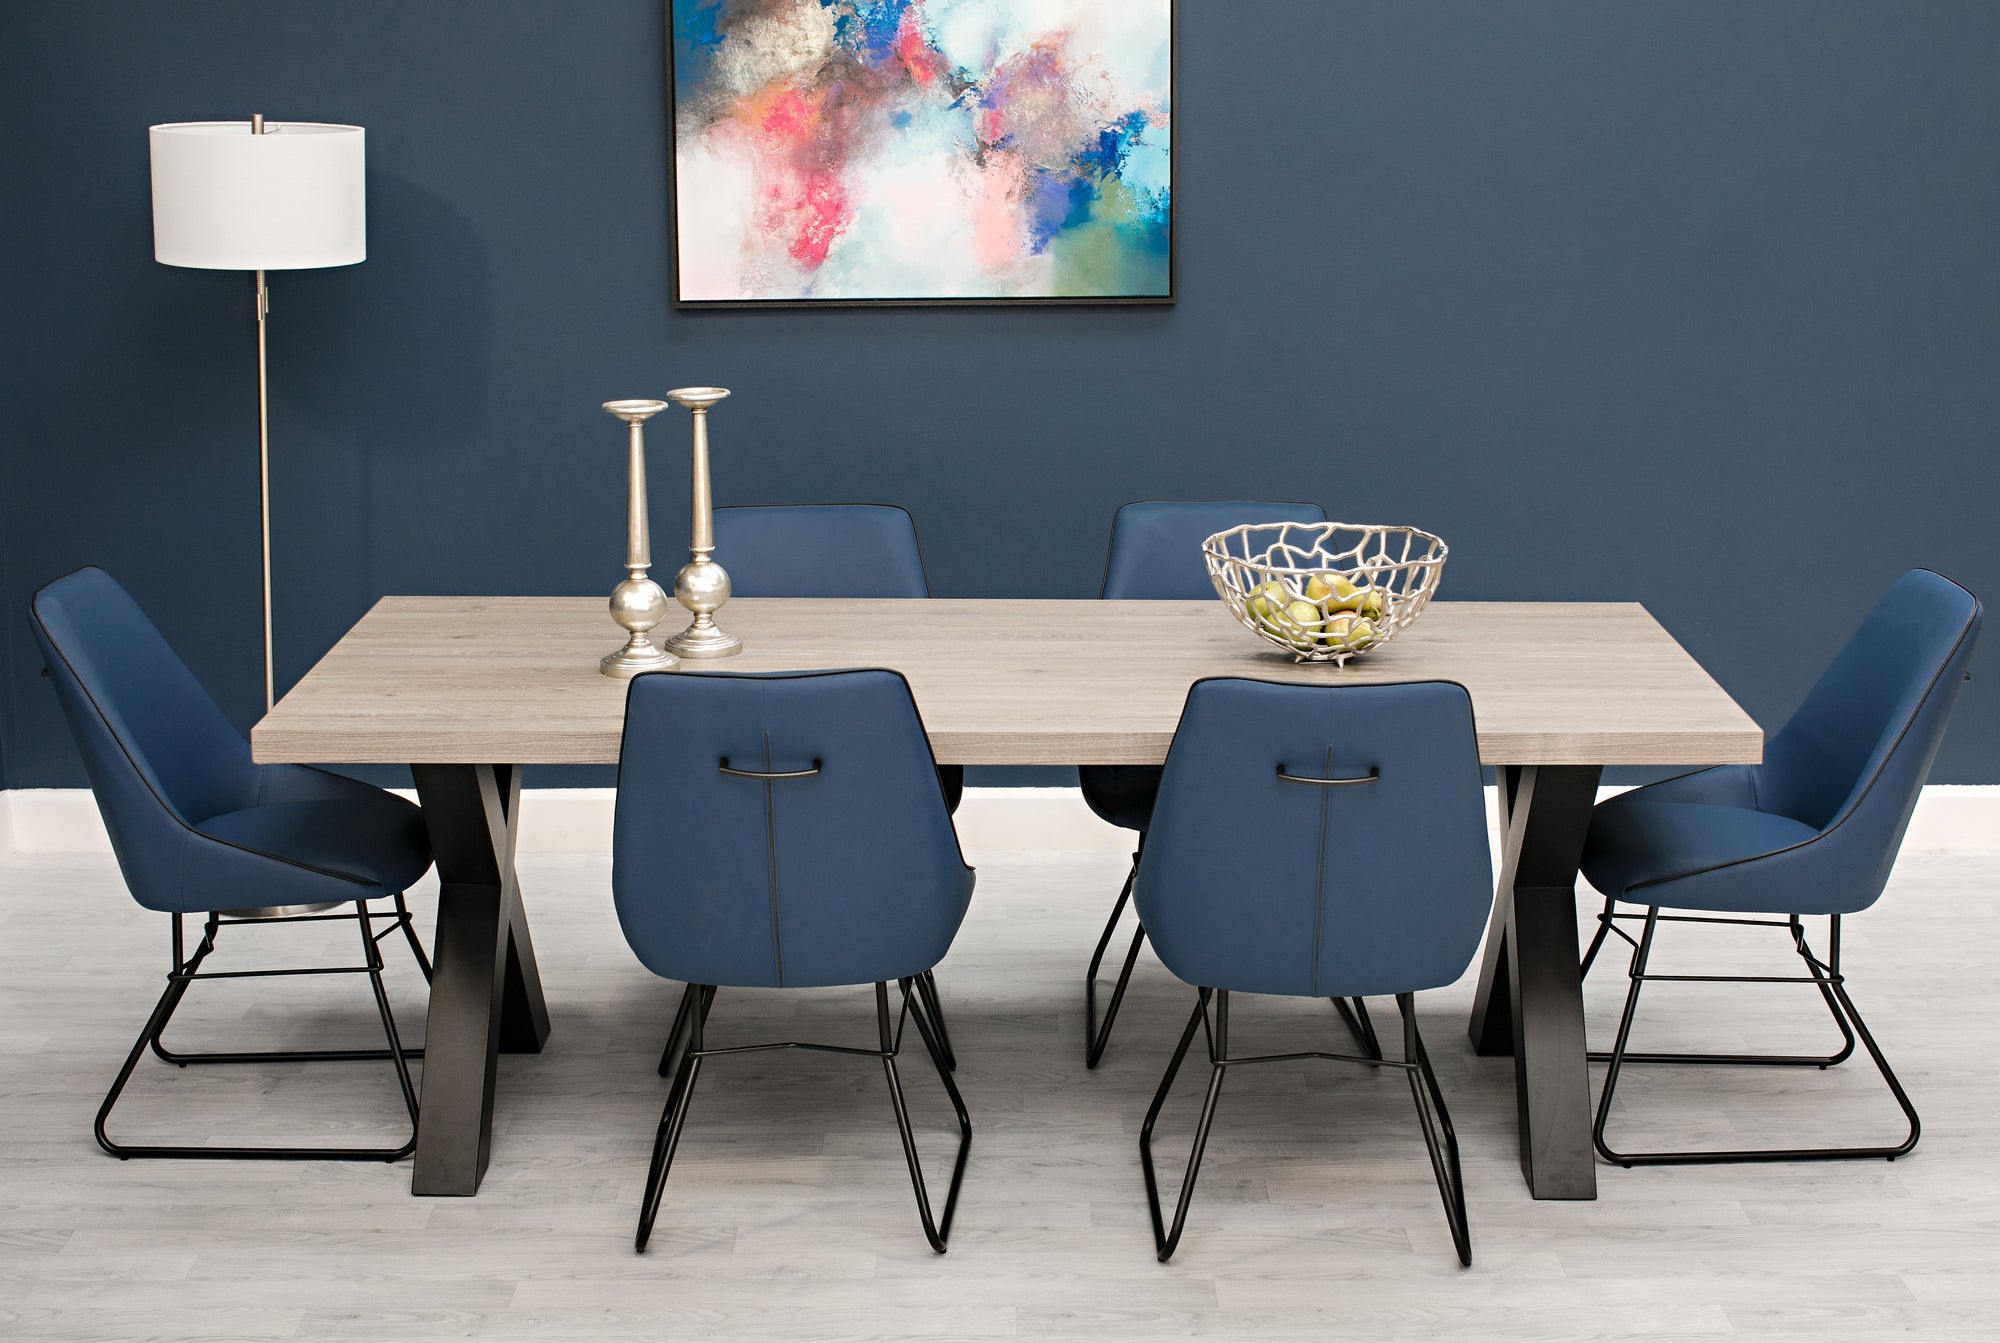 Material matters: choosing between wooden, velvet, and leather dining chairs